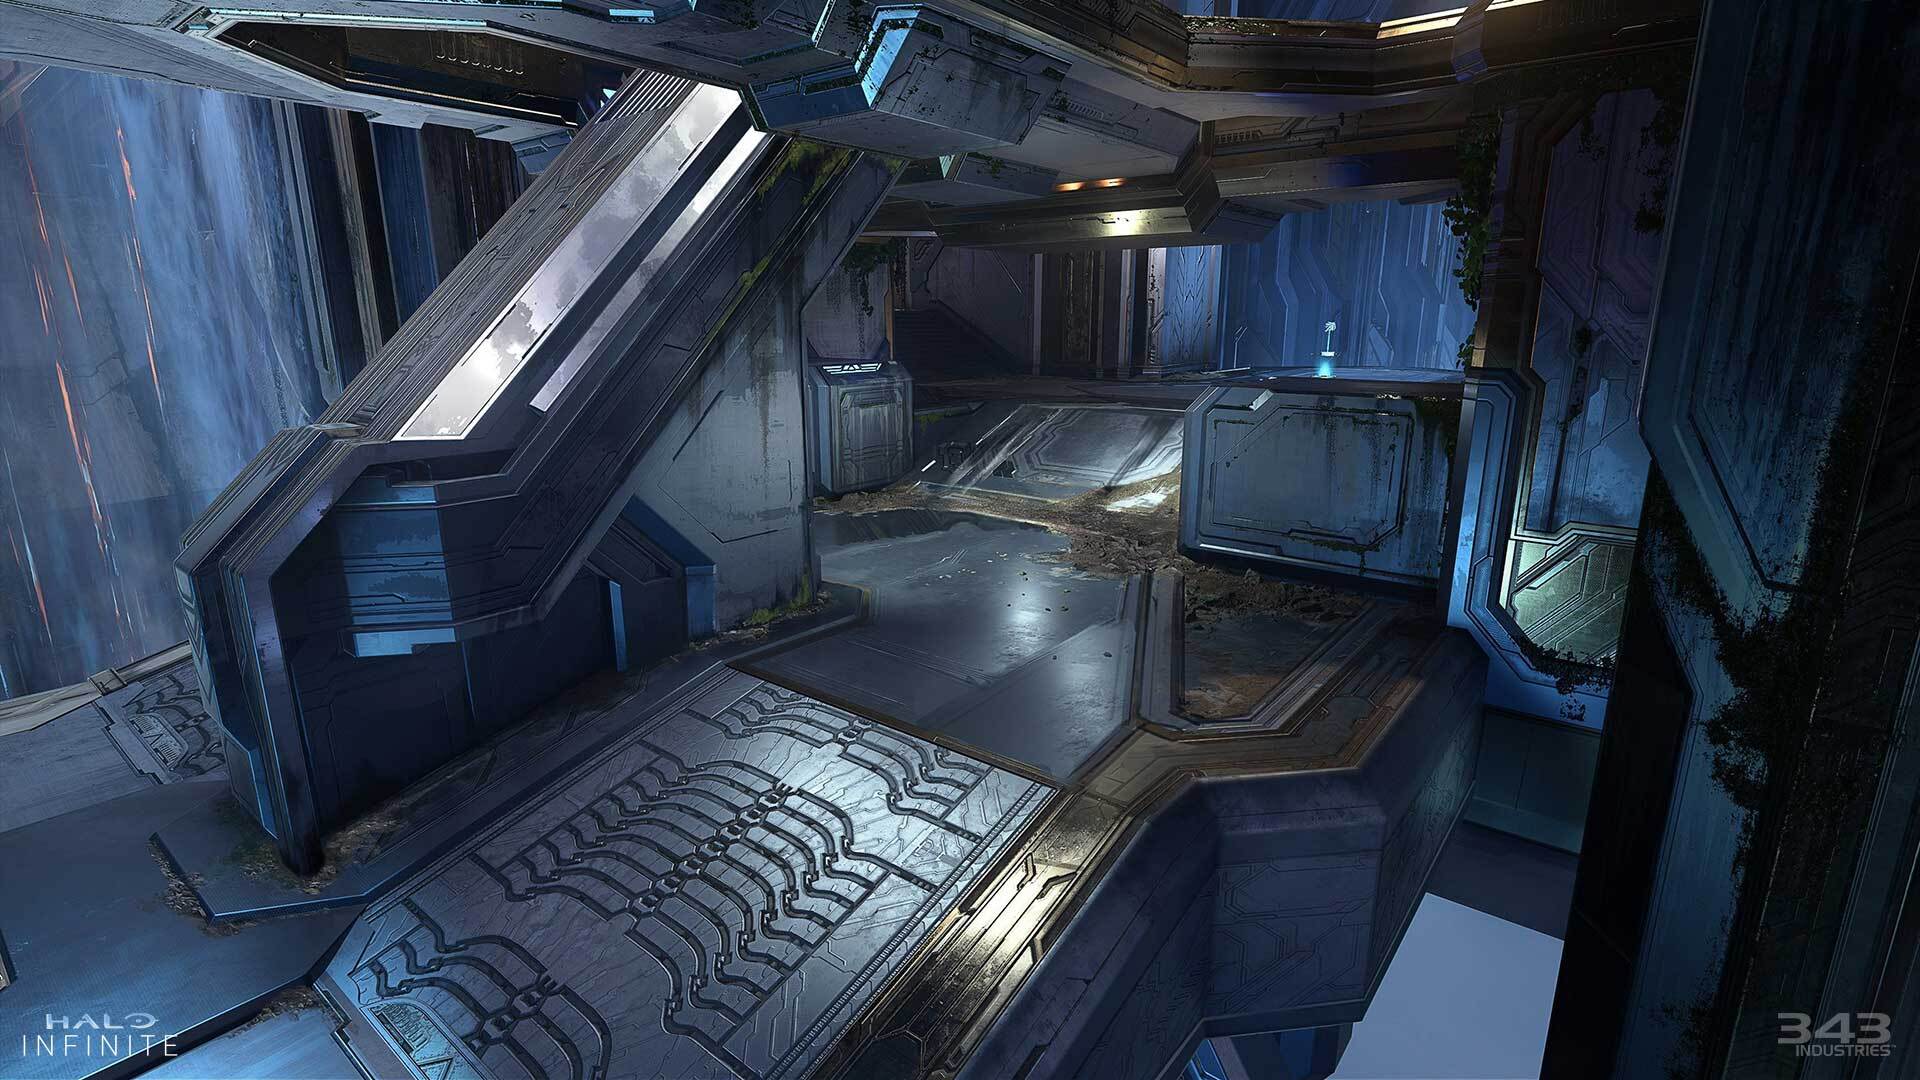 Halo Infinite Season 2 Will Add New Maps And Modes On May 3 - GameSpot